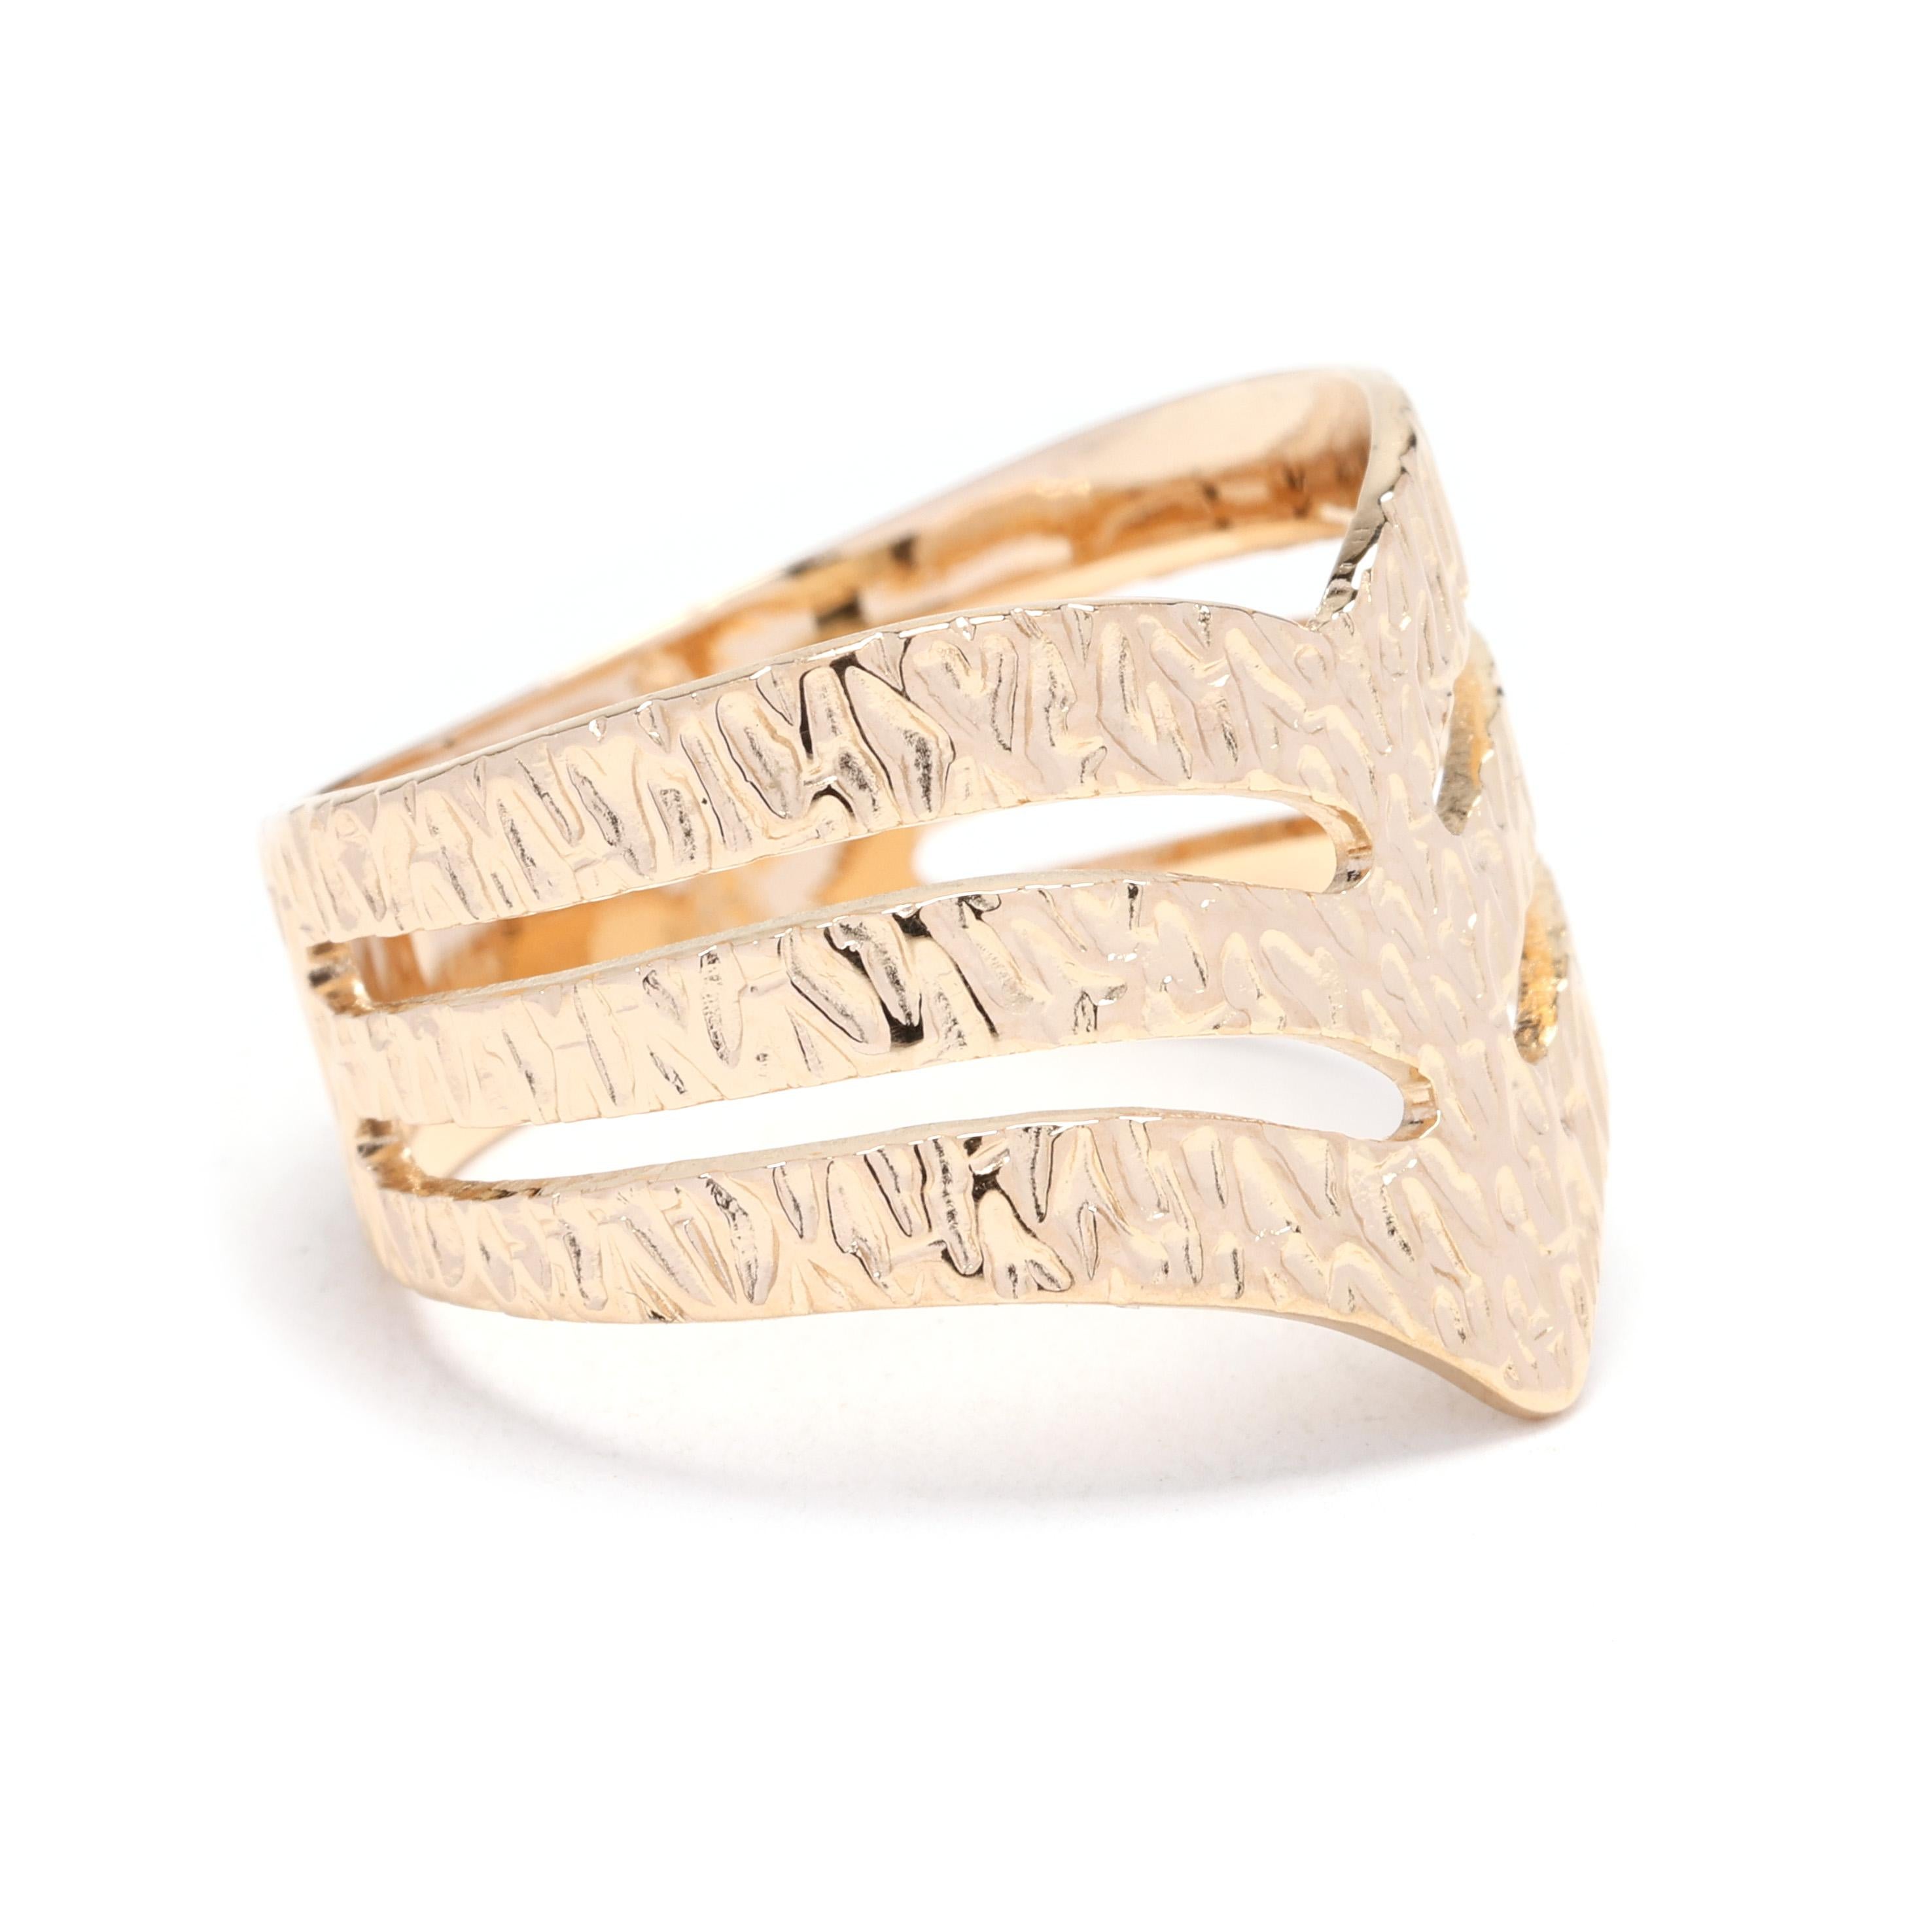 Add a touch of elegance to your look with this stunning 18k gold band ring. The band features a unique pattern with three stripes, adding dimension and style. Made of 18k yellow gold, this ring is not only beautiful but also durable and